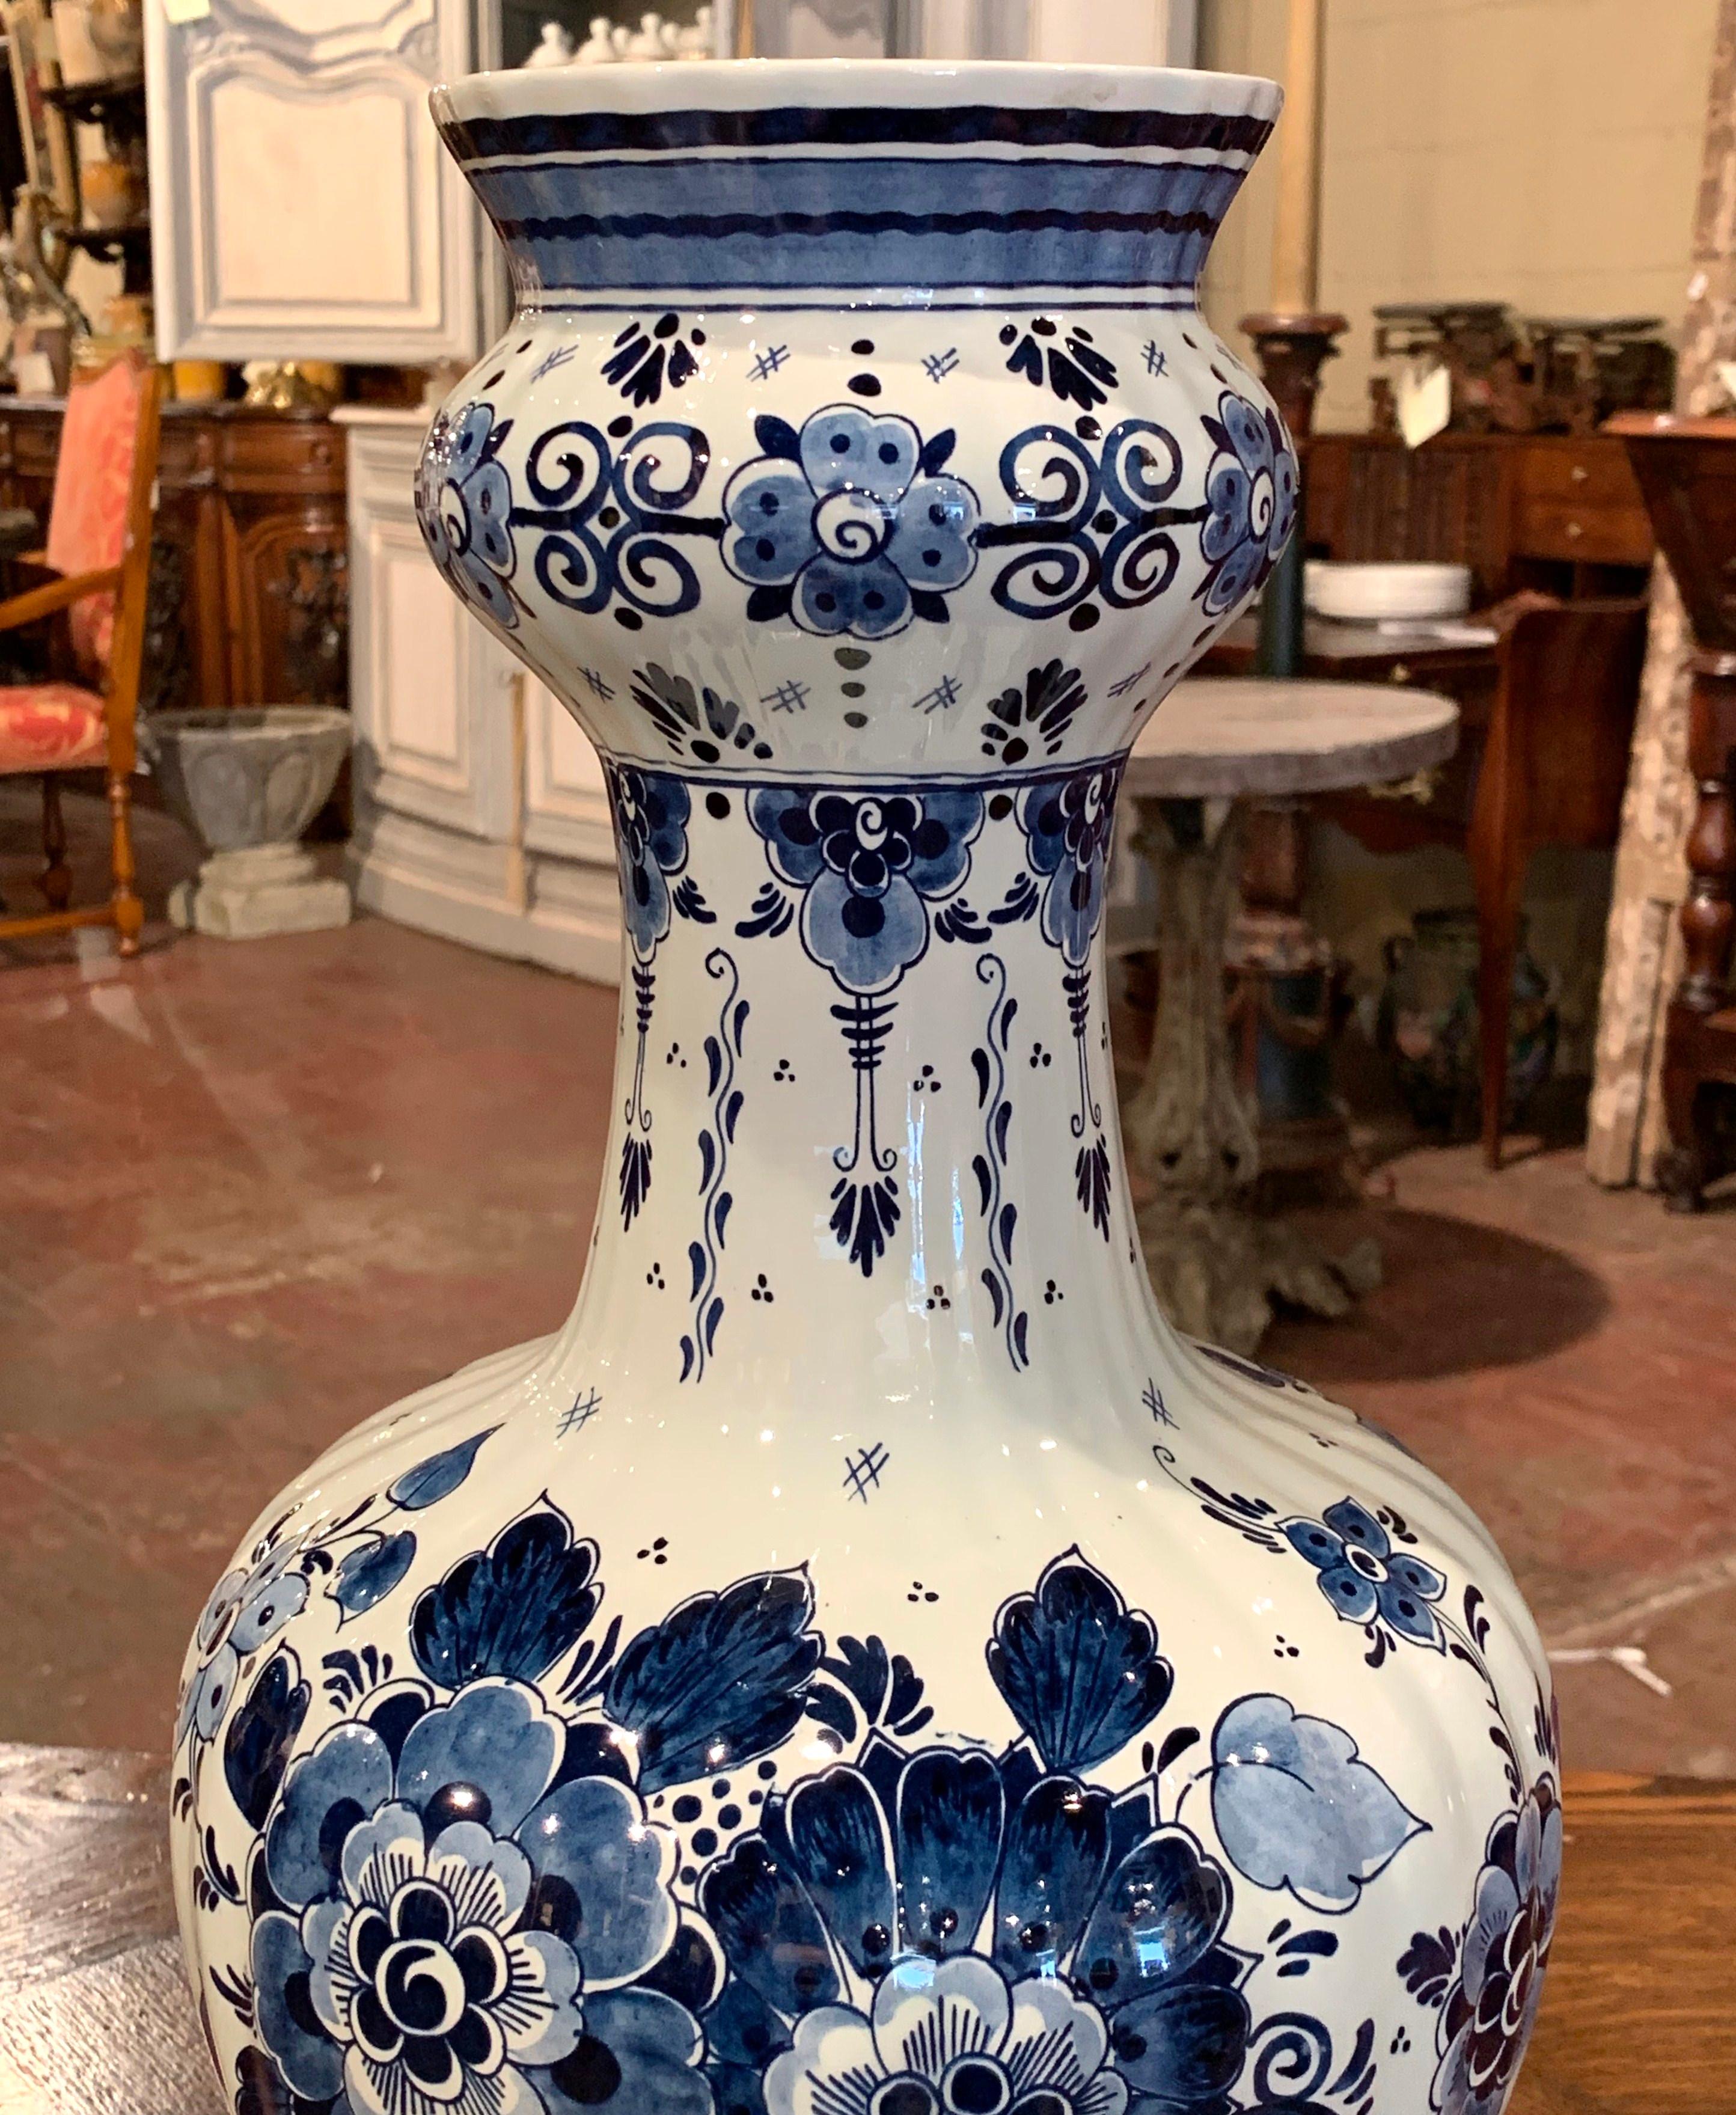 Decorate a mantle or buffet with this tall, ceramic vase from Holland. The vintage, Dutch vase was sculpted circa 1970, yet has the traditional antique Delft style. The ceramic vase is hand painted with signature blue and white floral decor and is